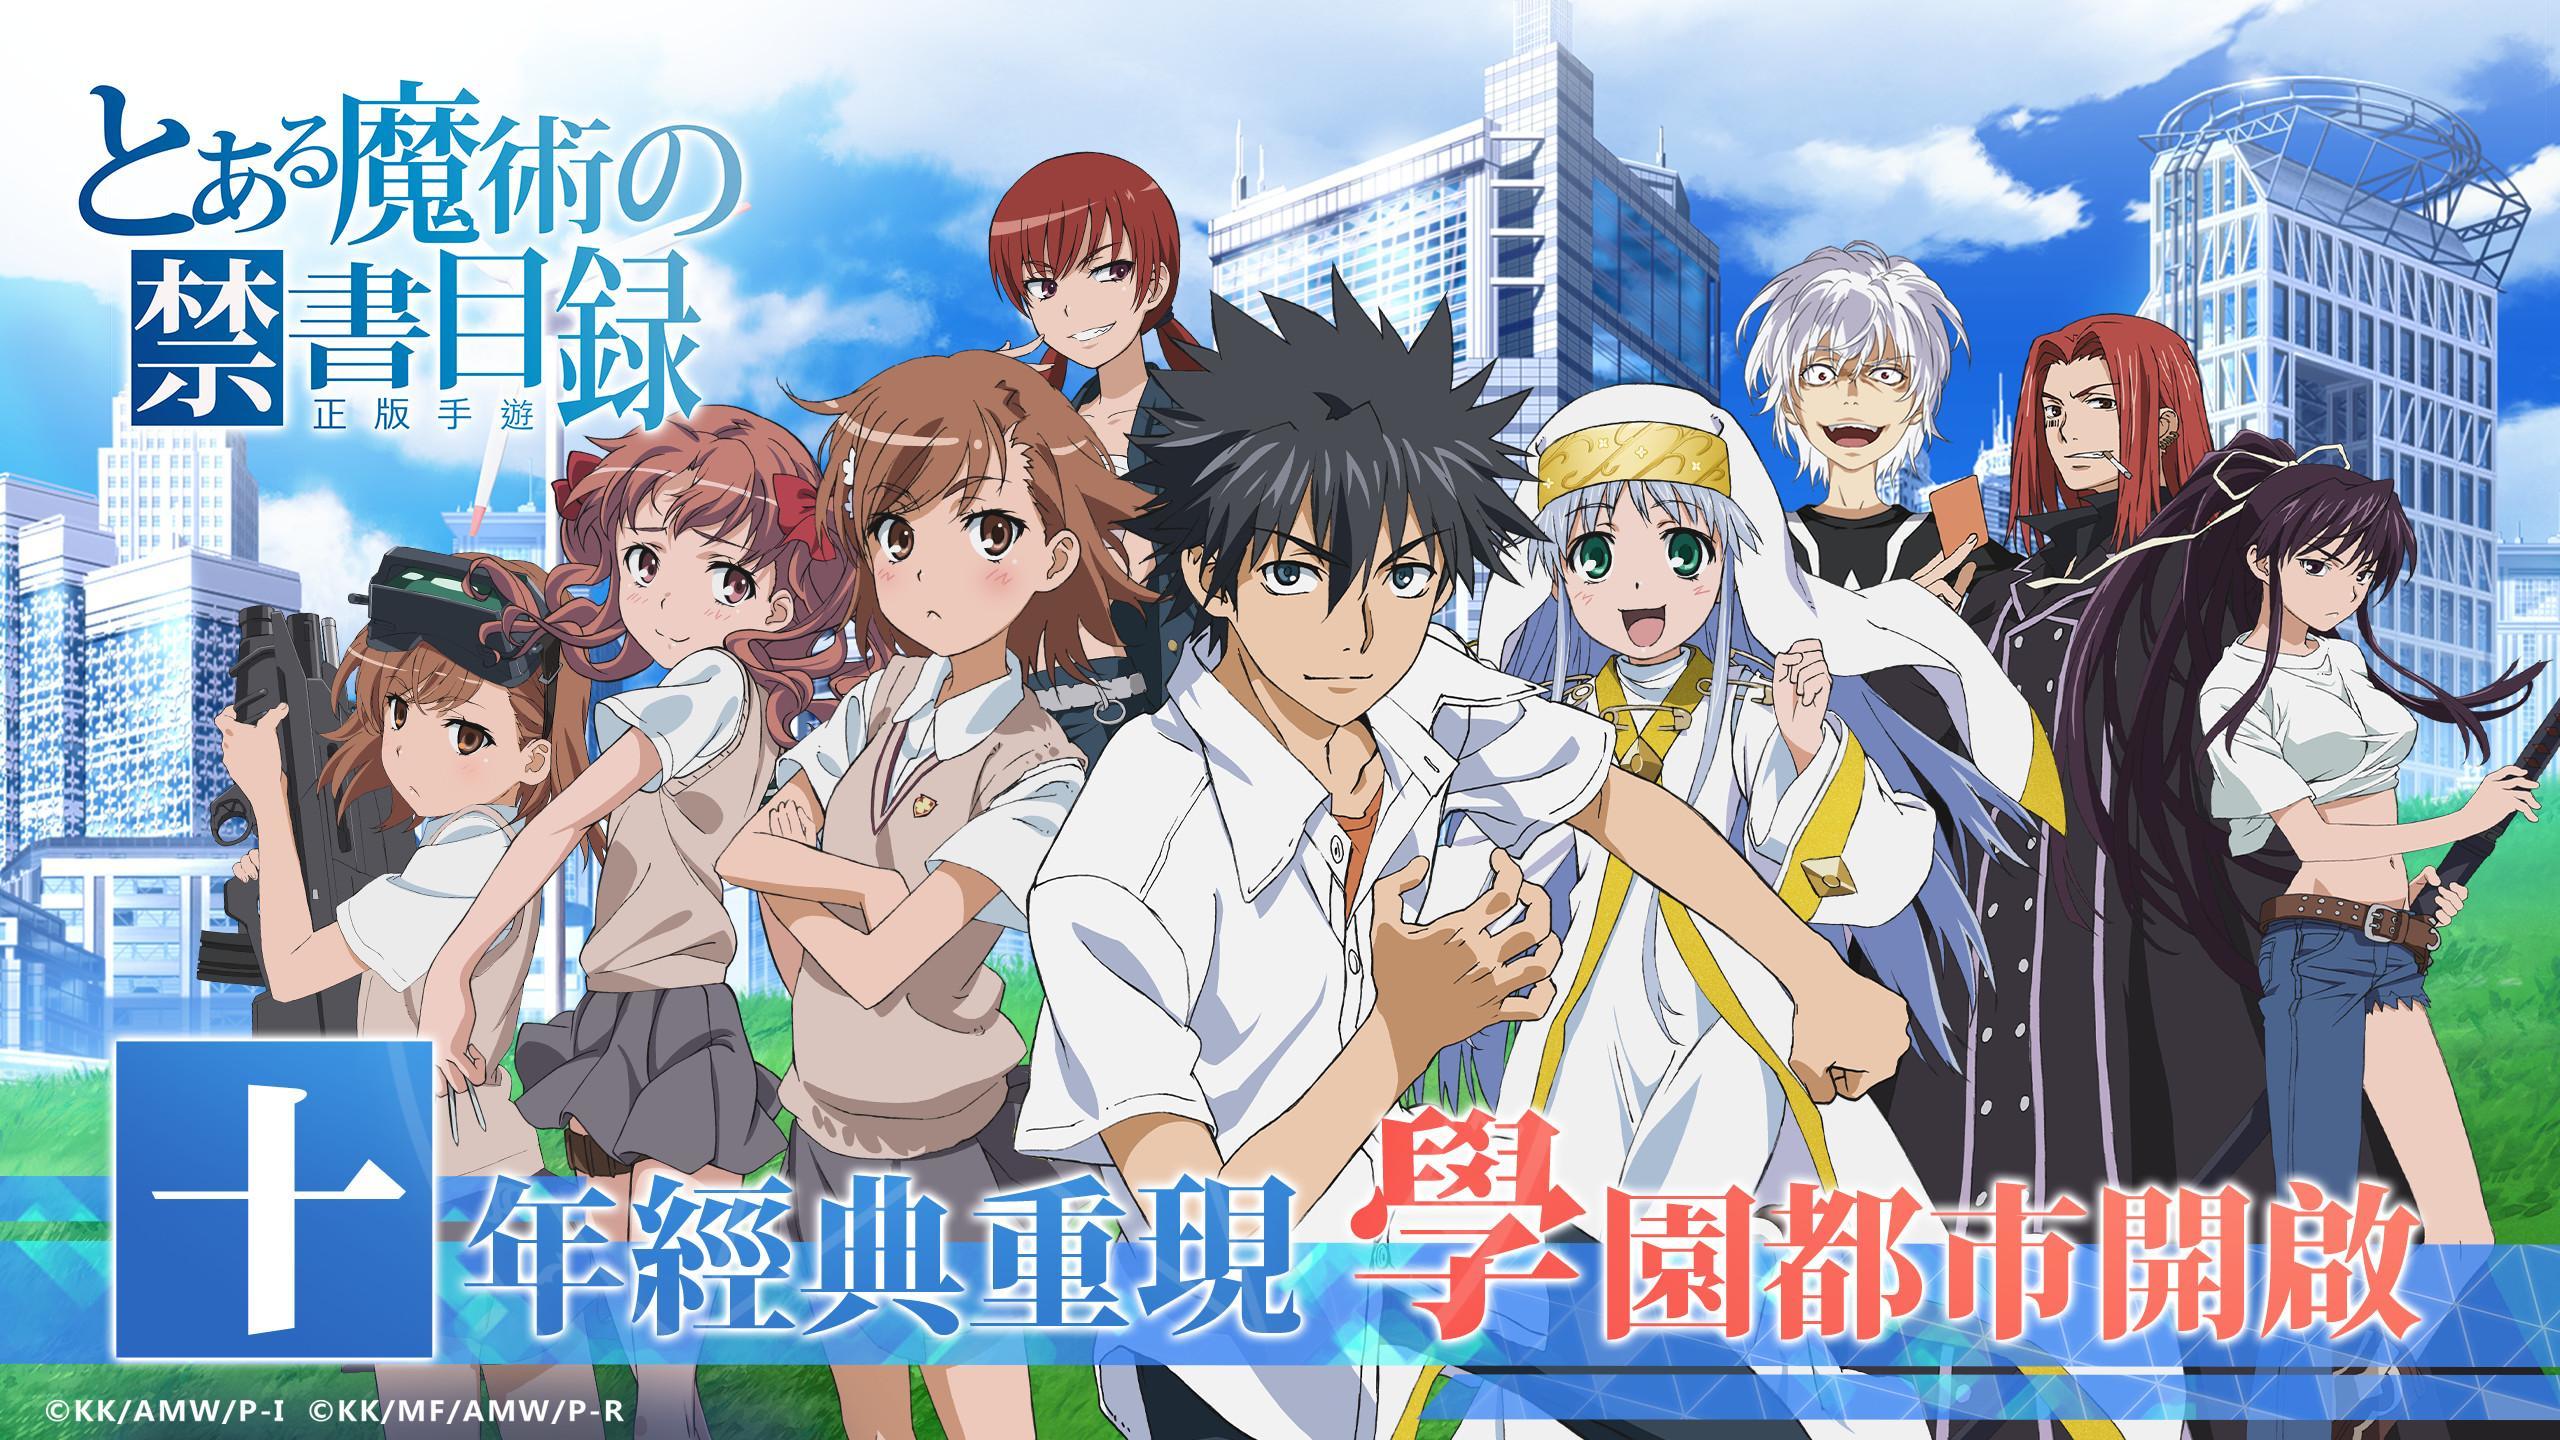 A Certain Magical Index: 10 Things You Didn't Know About Season 4